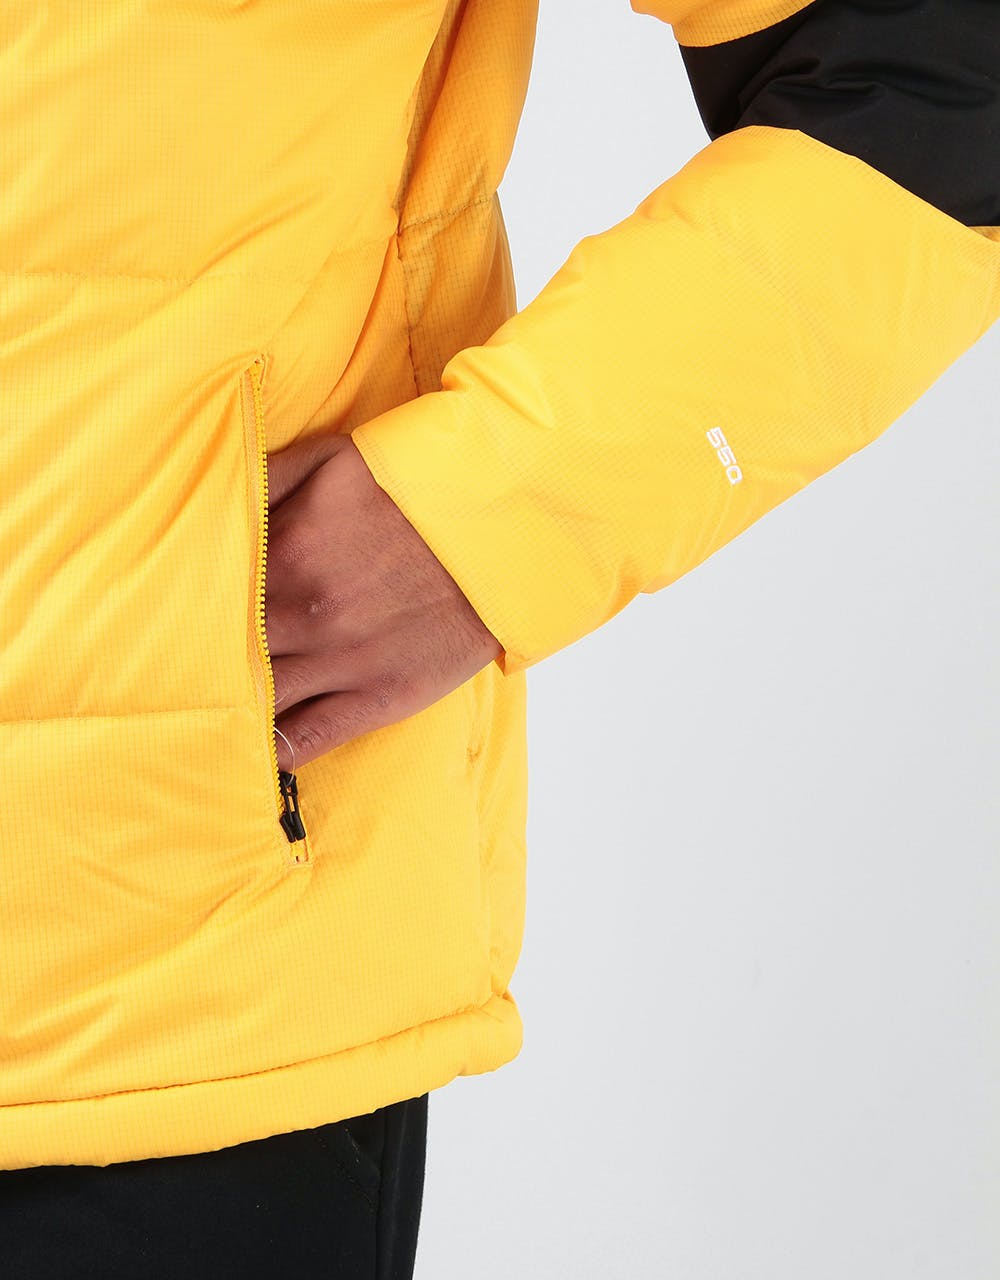 The North Face Himalayan Light Down Hoodie - TNF Yellow